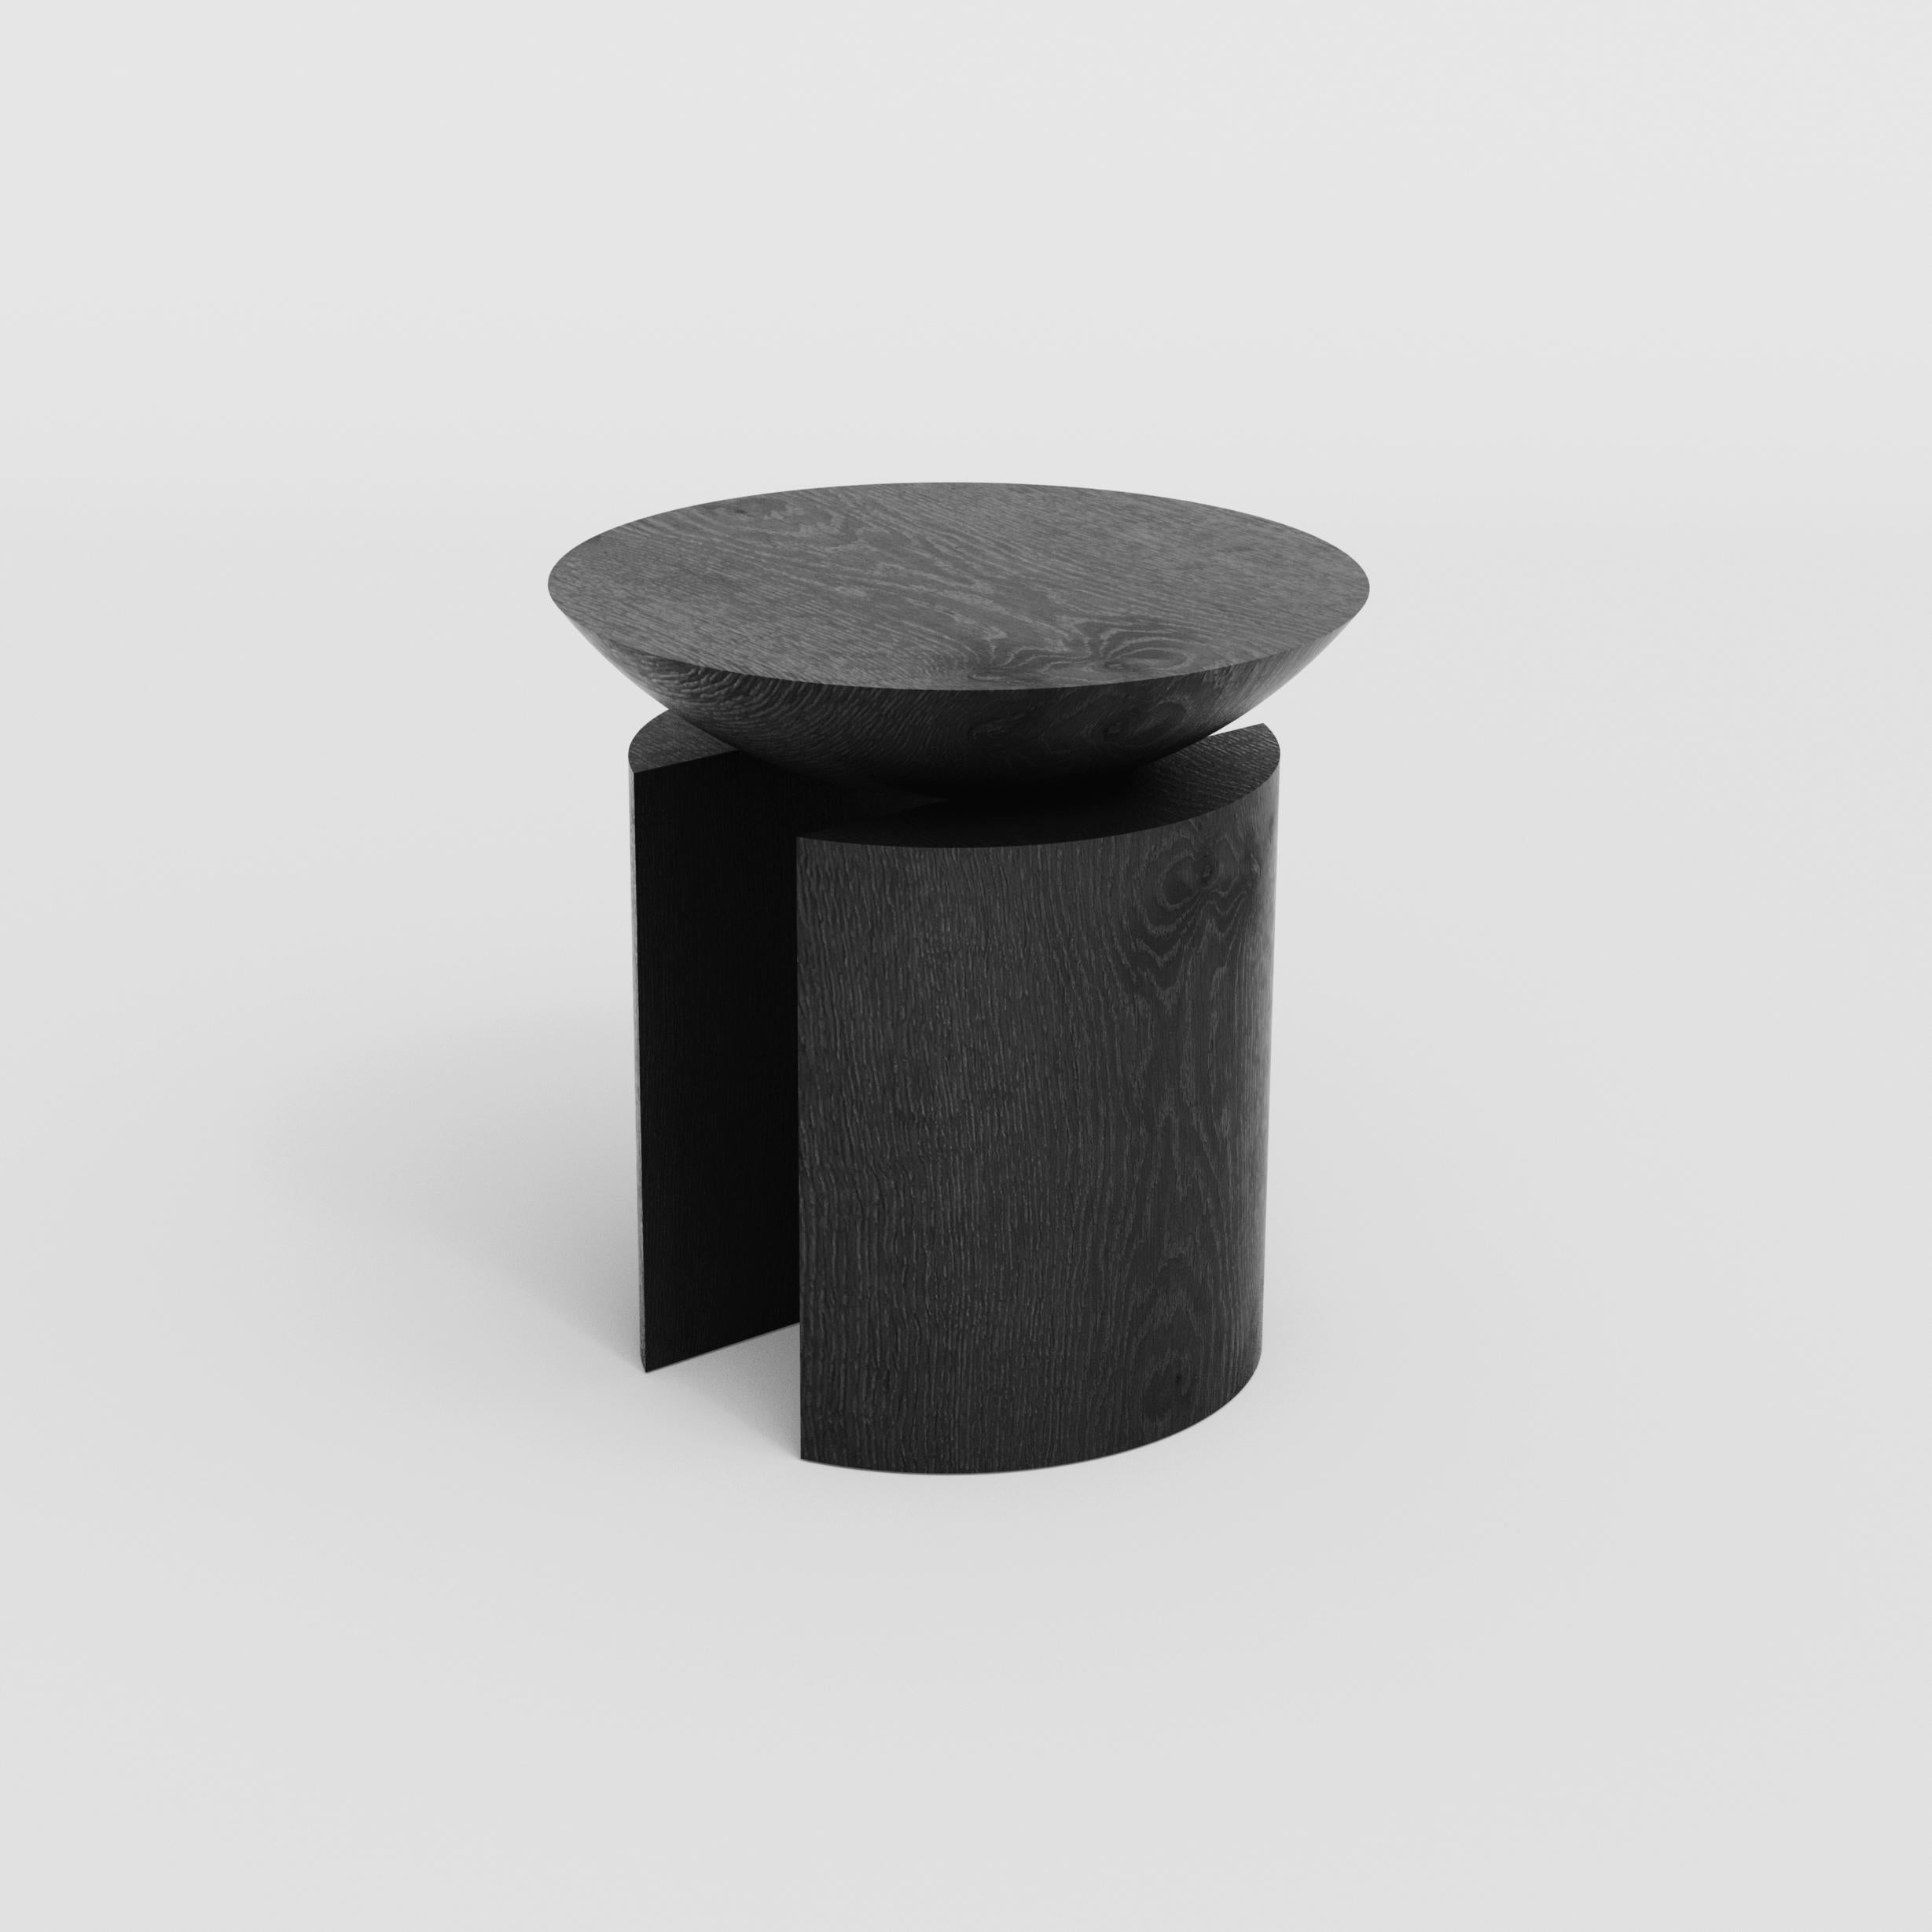 Brazilian Anca Alta Sculptural Side Table/Stool Tropical Hardwood by Pedro Paulo Venzon